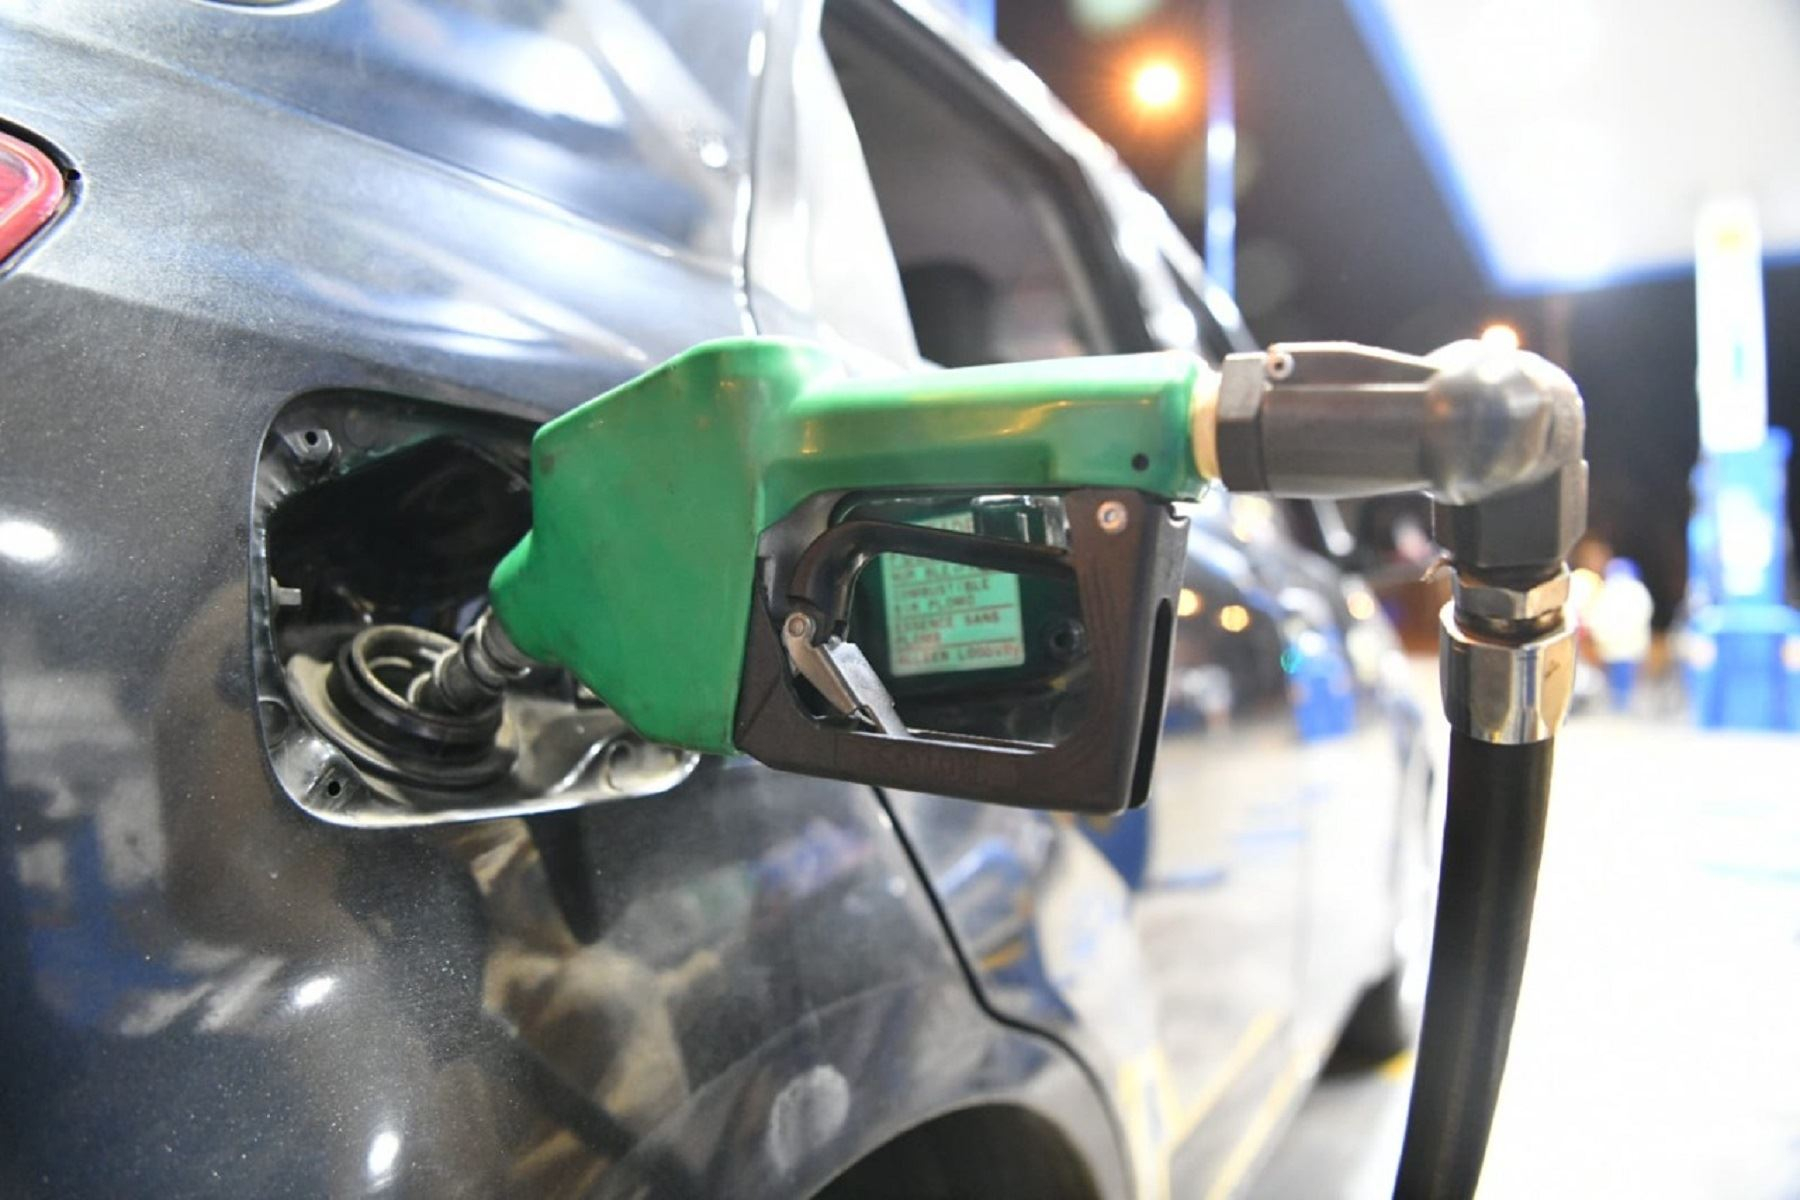 Fuels: reference prices fell to S/0.46 per gallon this week